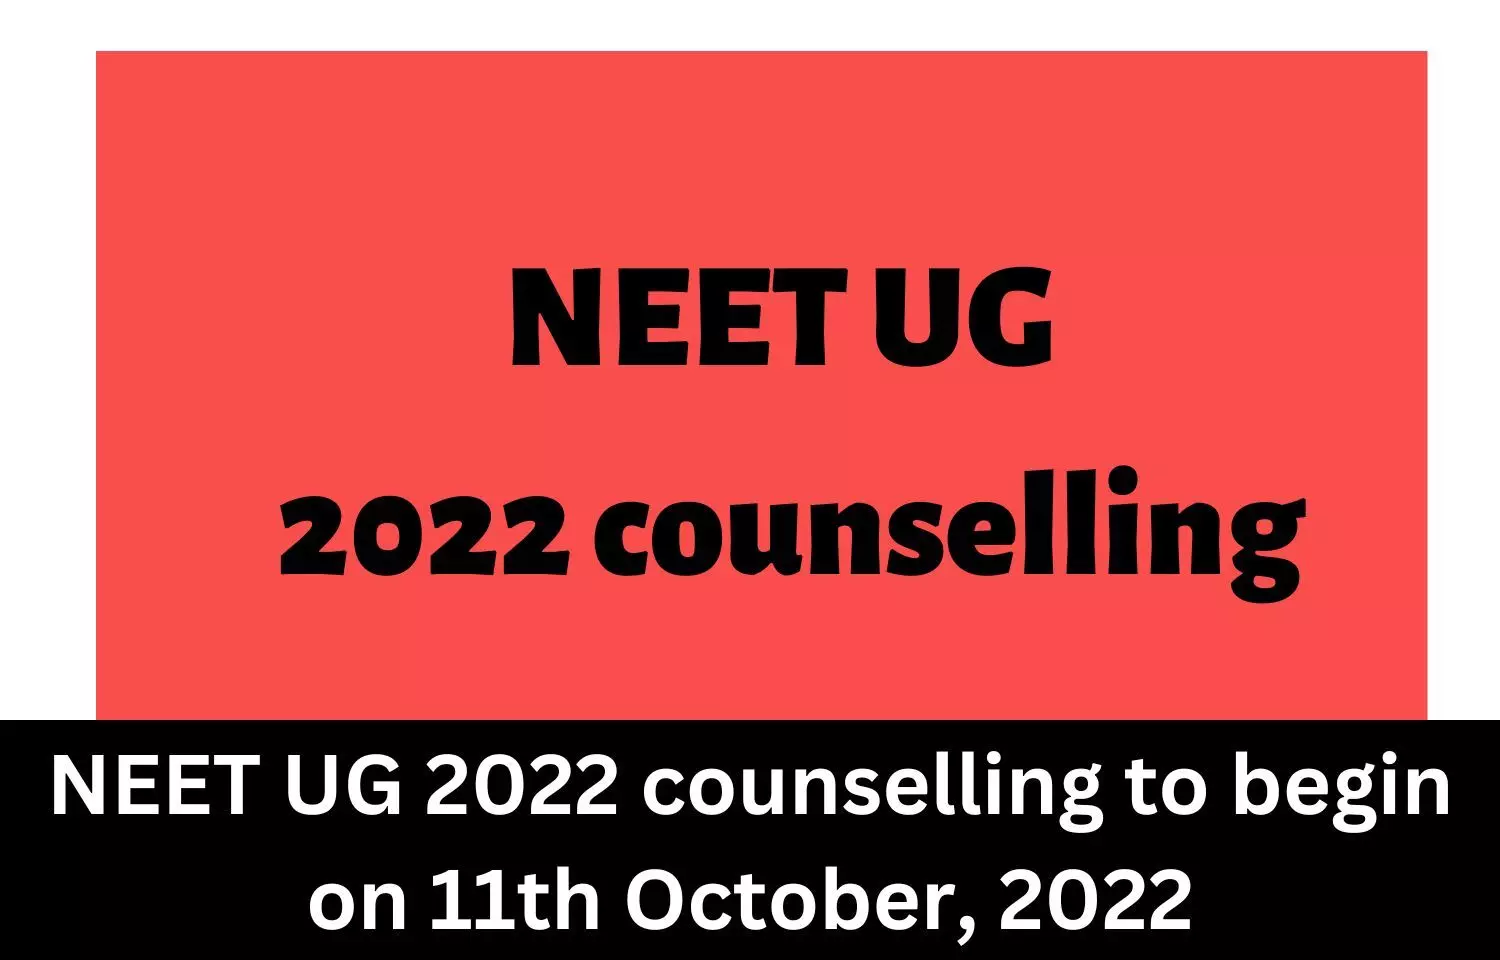 NEET UG 2022 counselling to begin on October 11, details